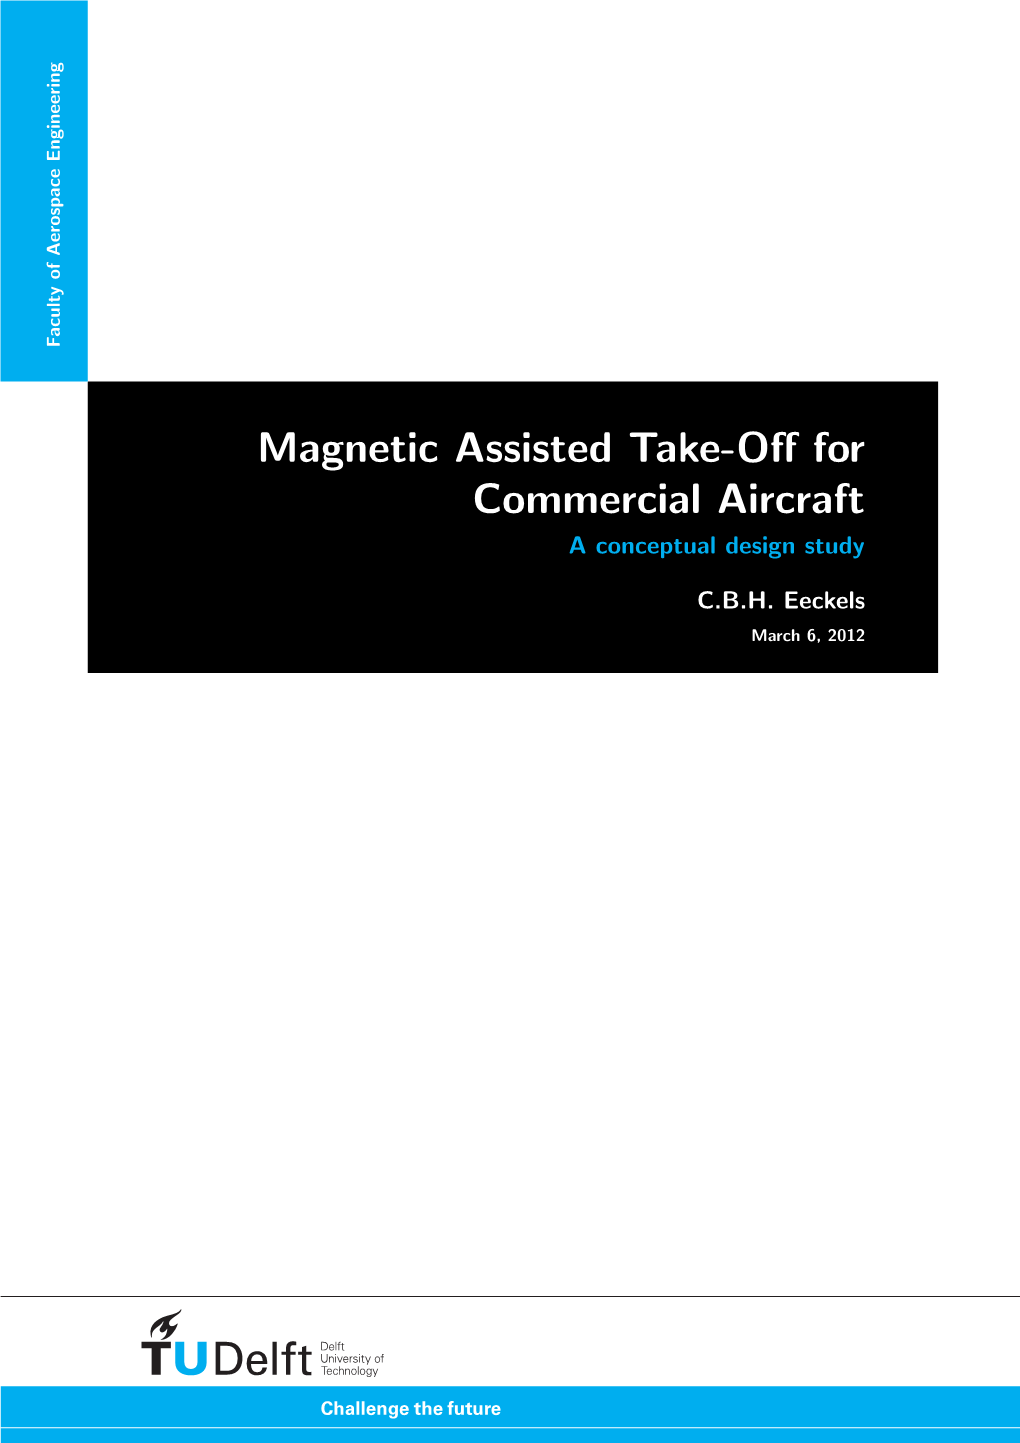 Magnetic Assisted Take-Off for Commercial Aircraft